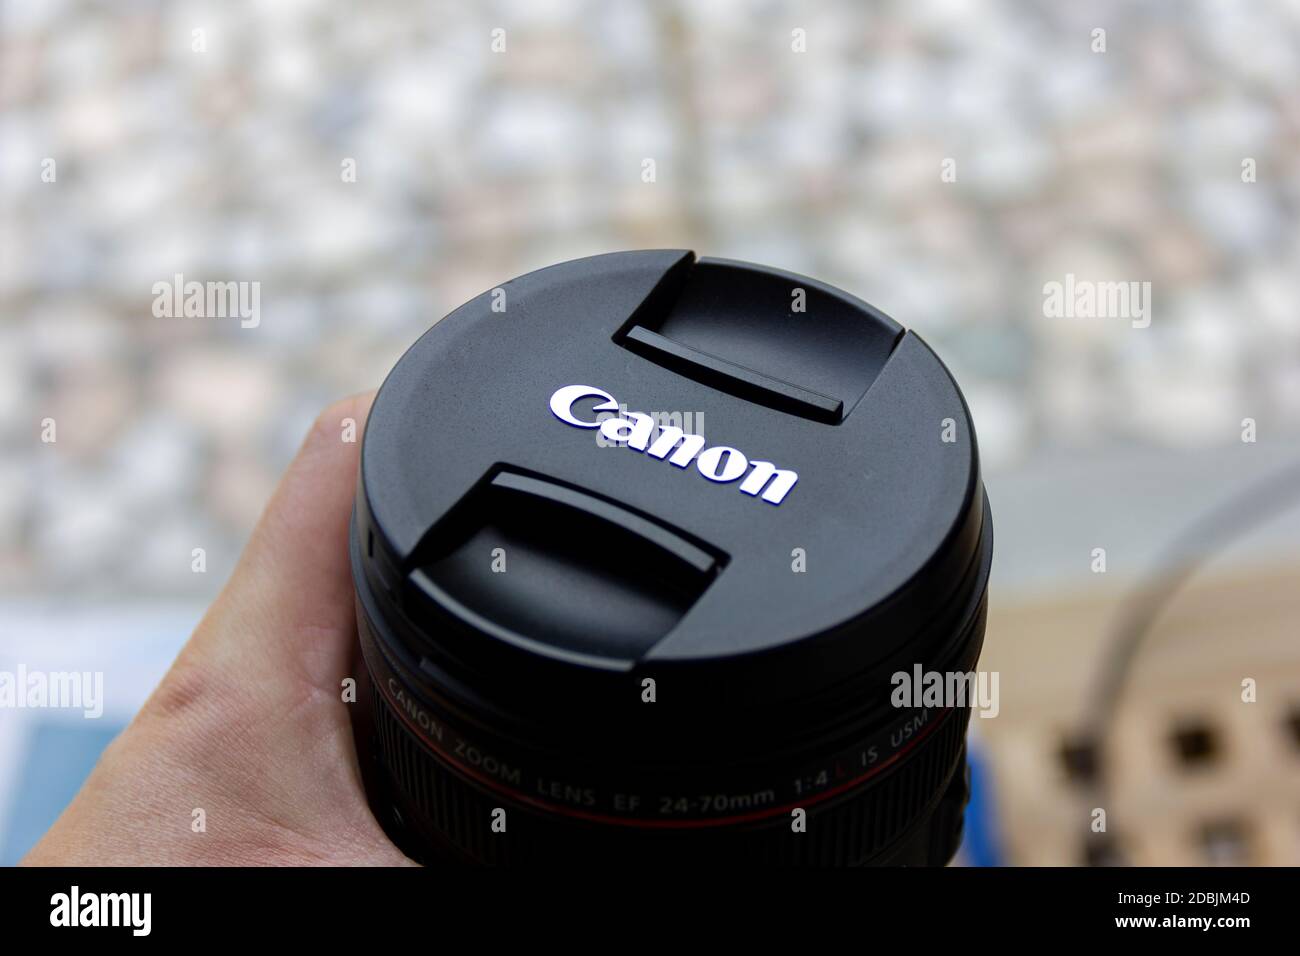 Brecht, Belgium - June 20 2020: A portrait of someone holding a canon L lens with a lens cap with the company logo attached to it. Stock Photo